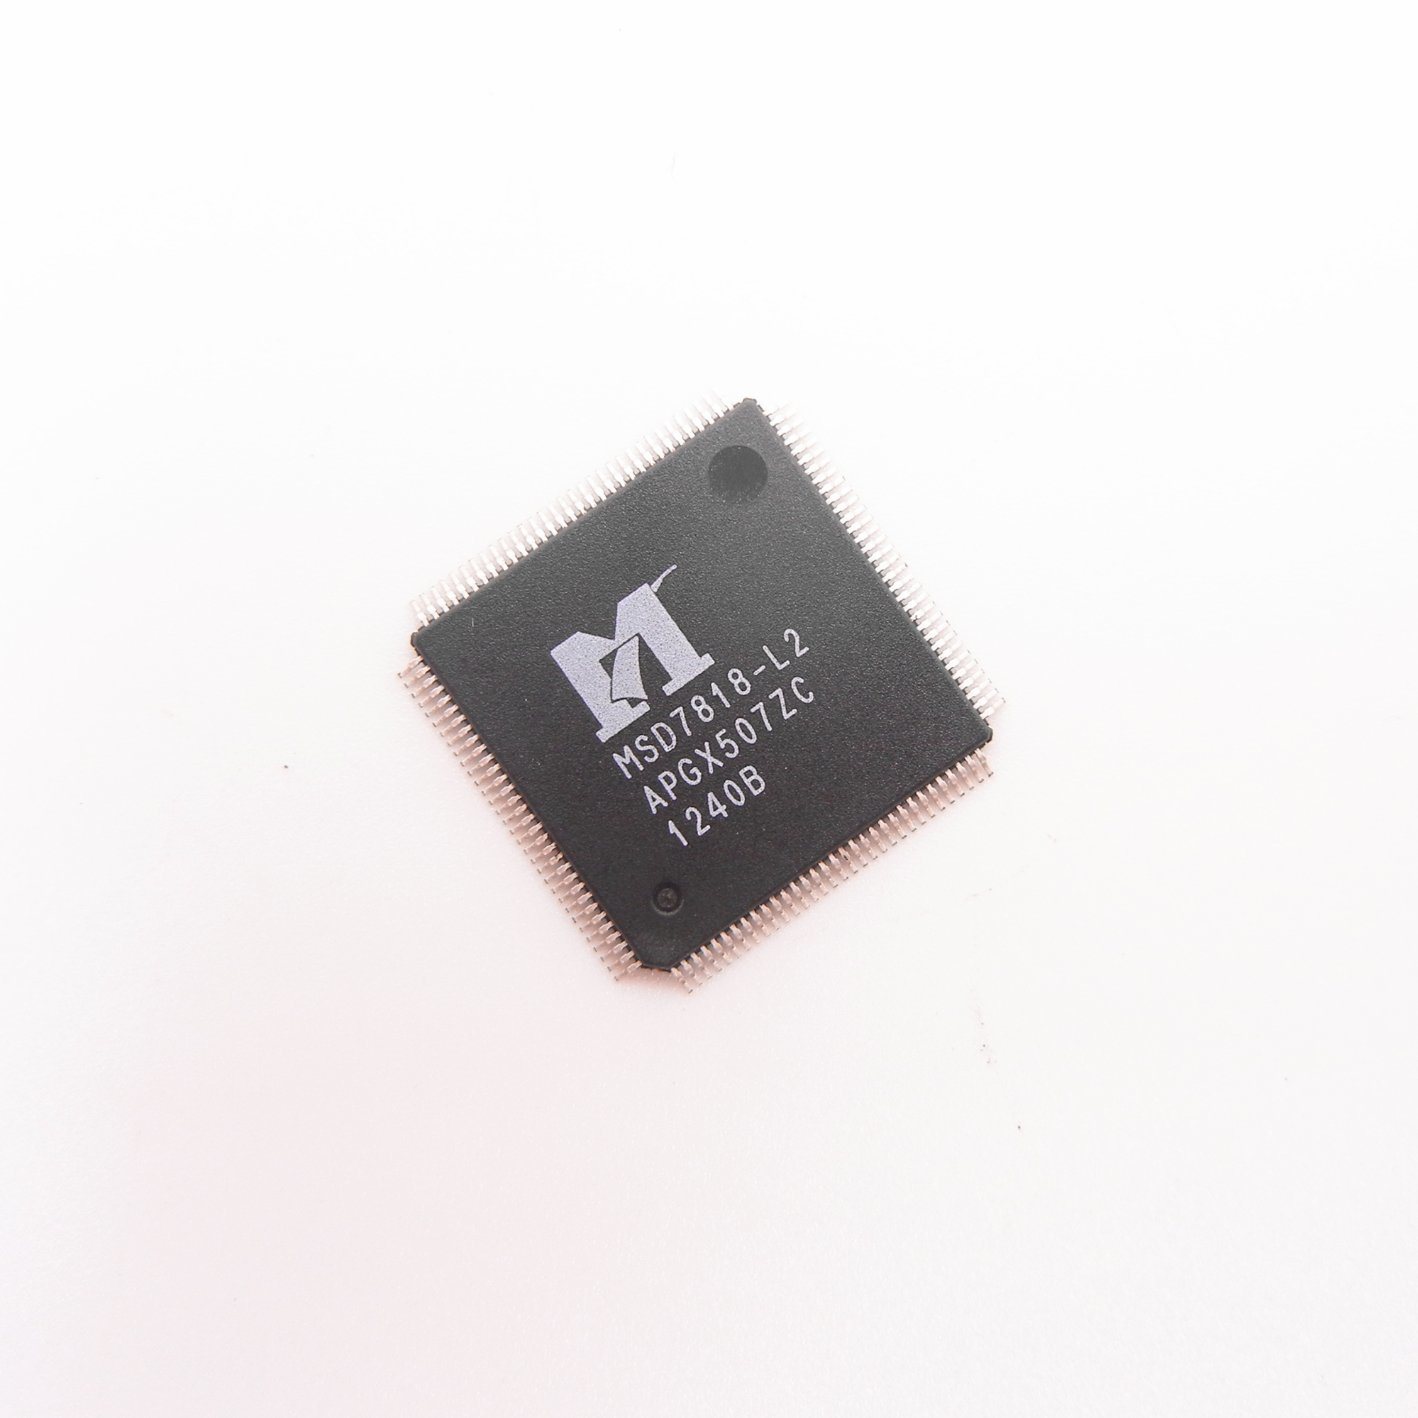 Msd7818-L2 New and Original Electronic Components IC